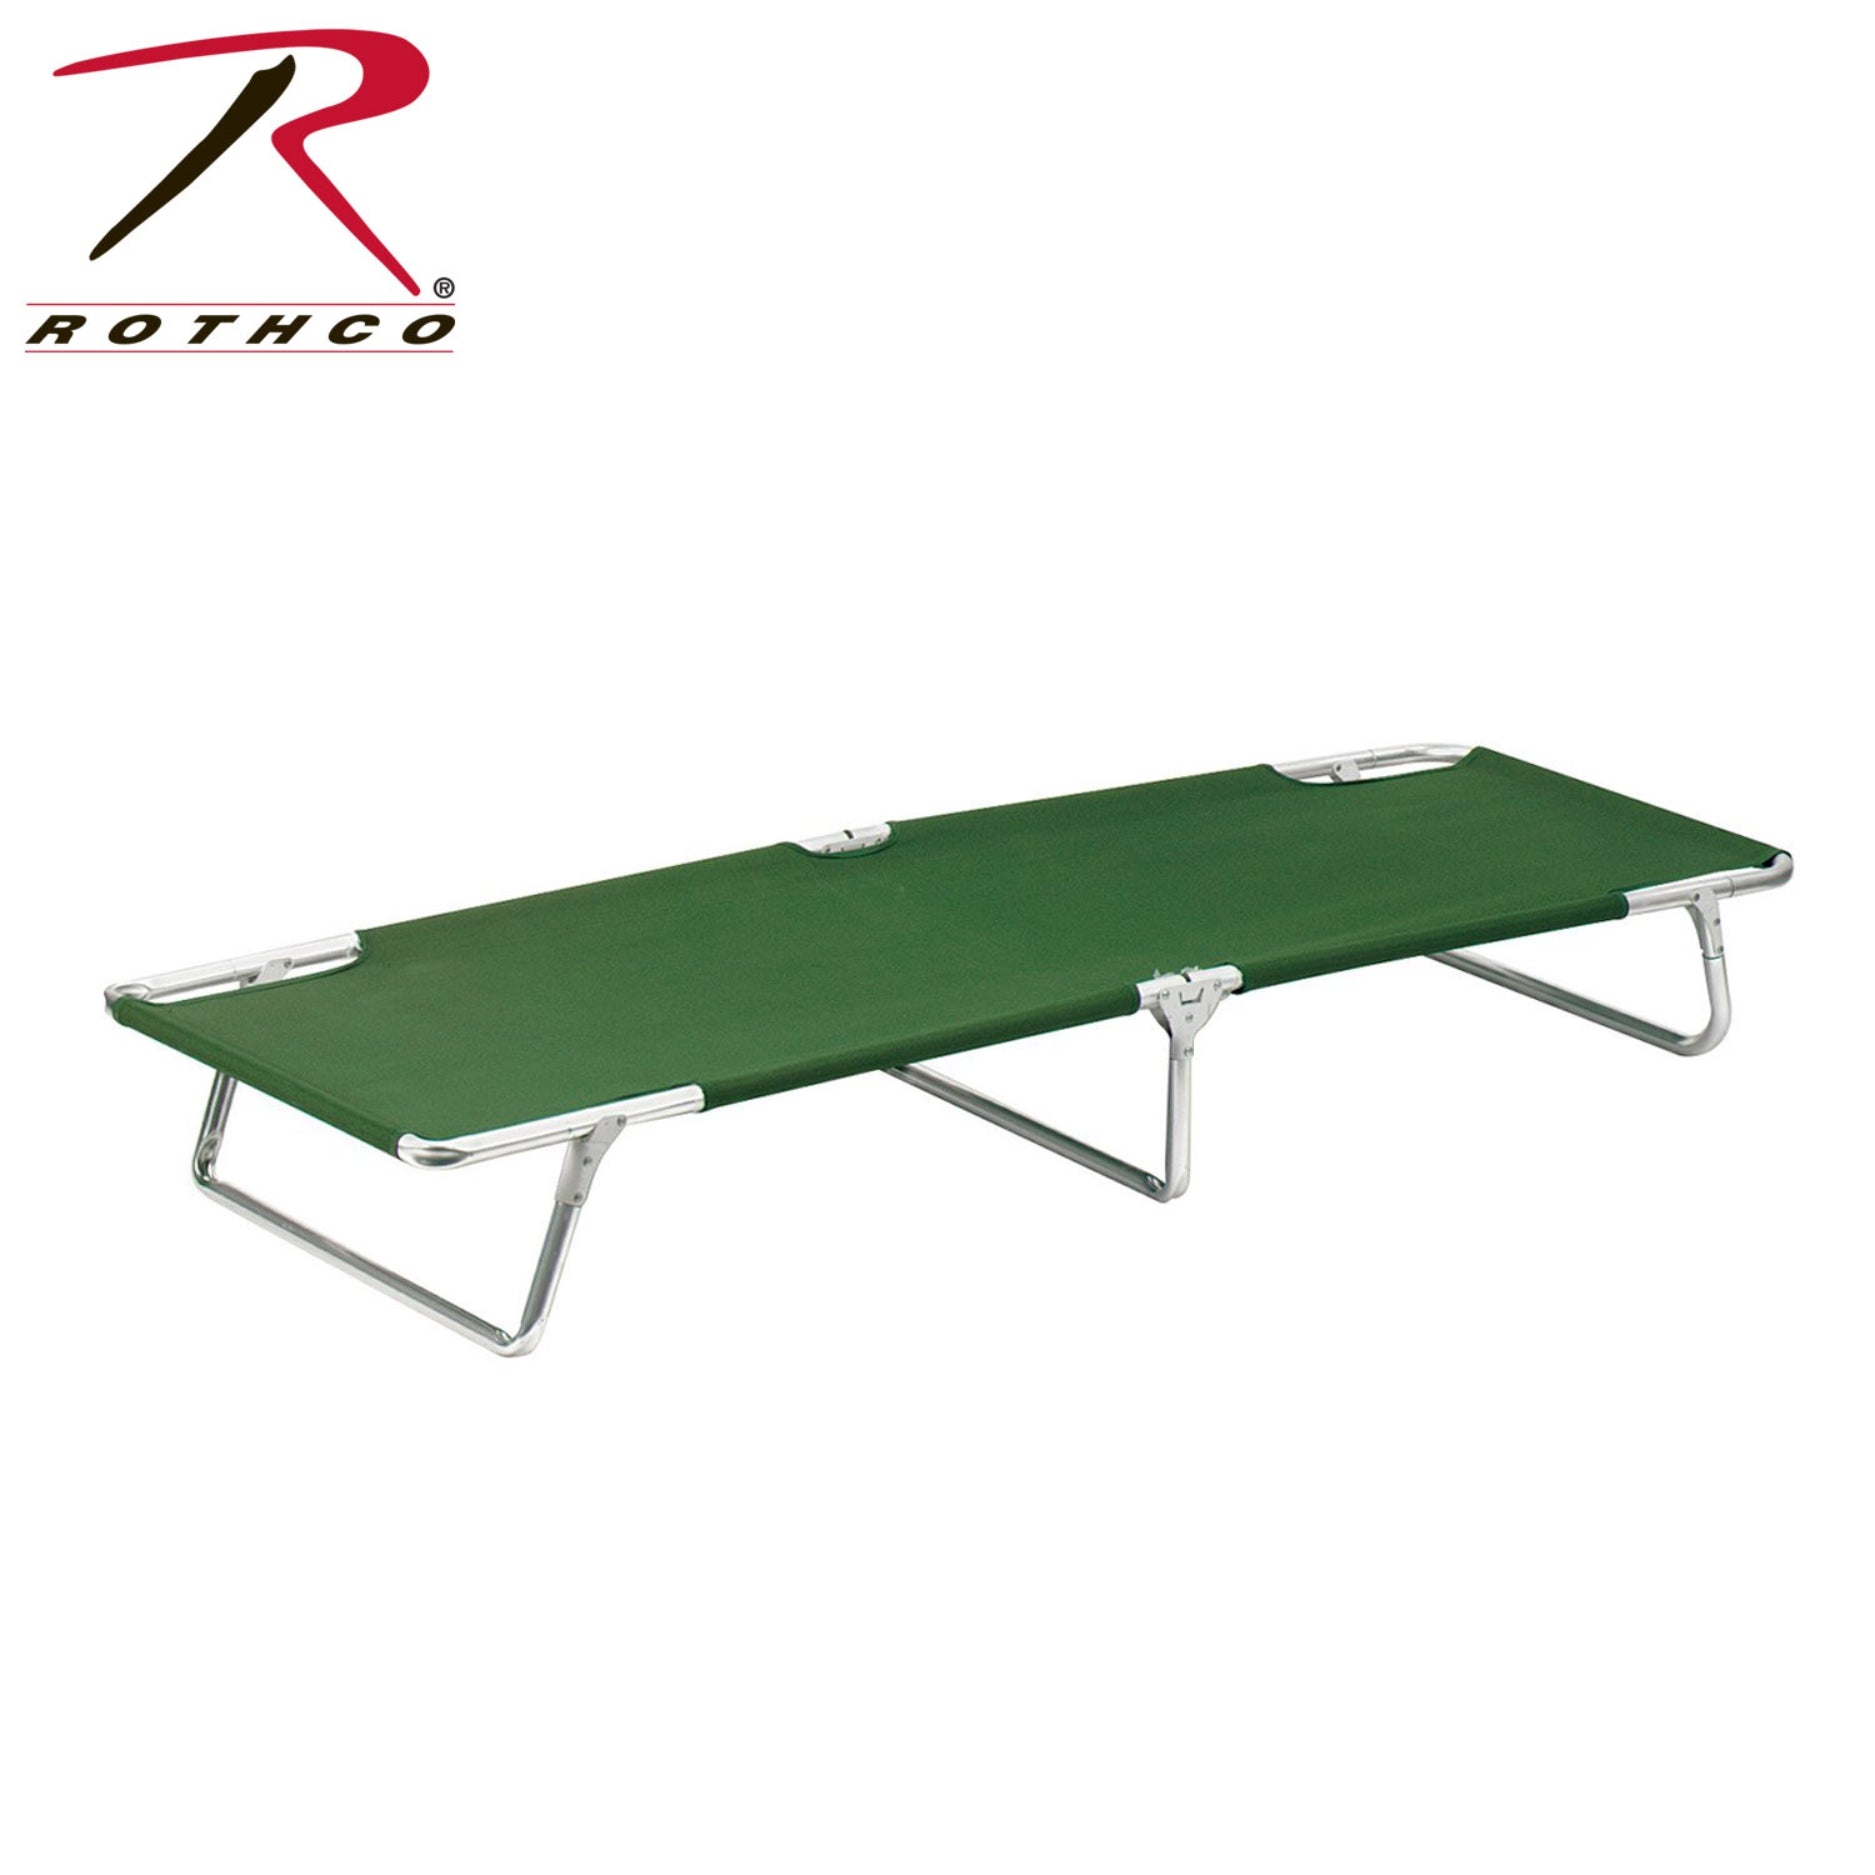 Rothco Camp Cot 613902458208 | All Security Equipment